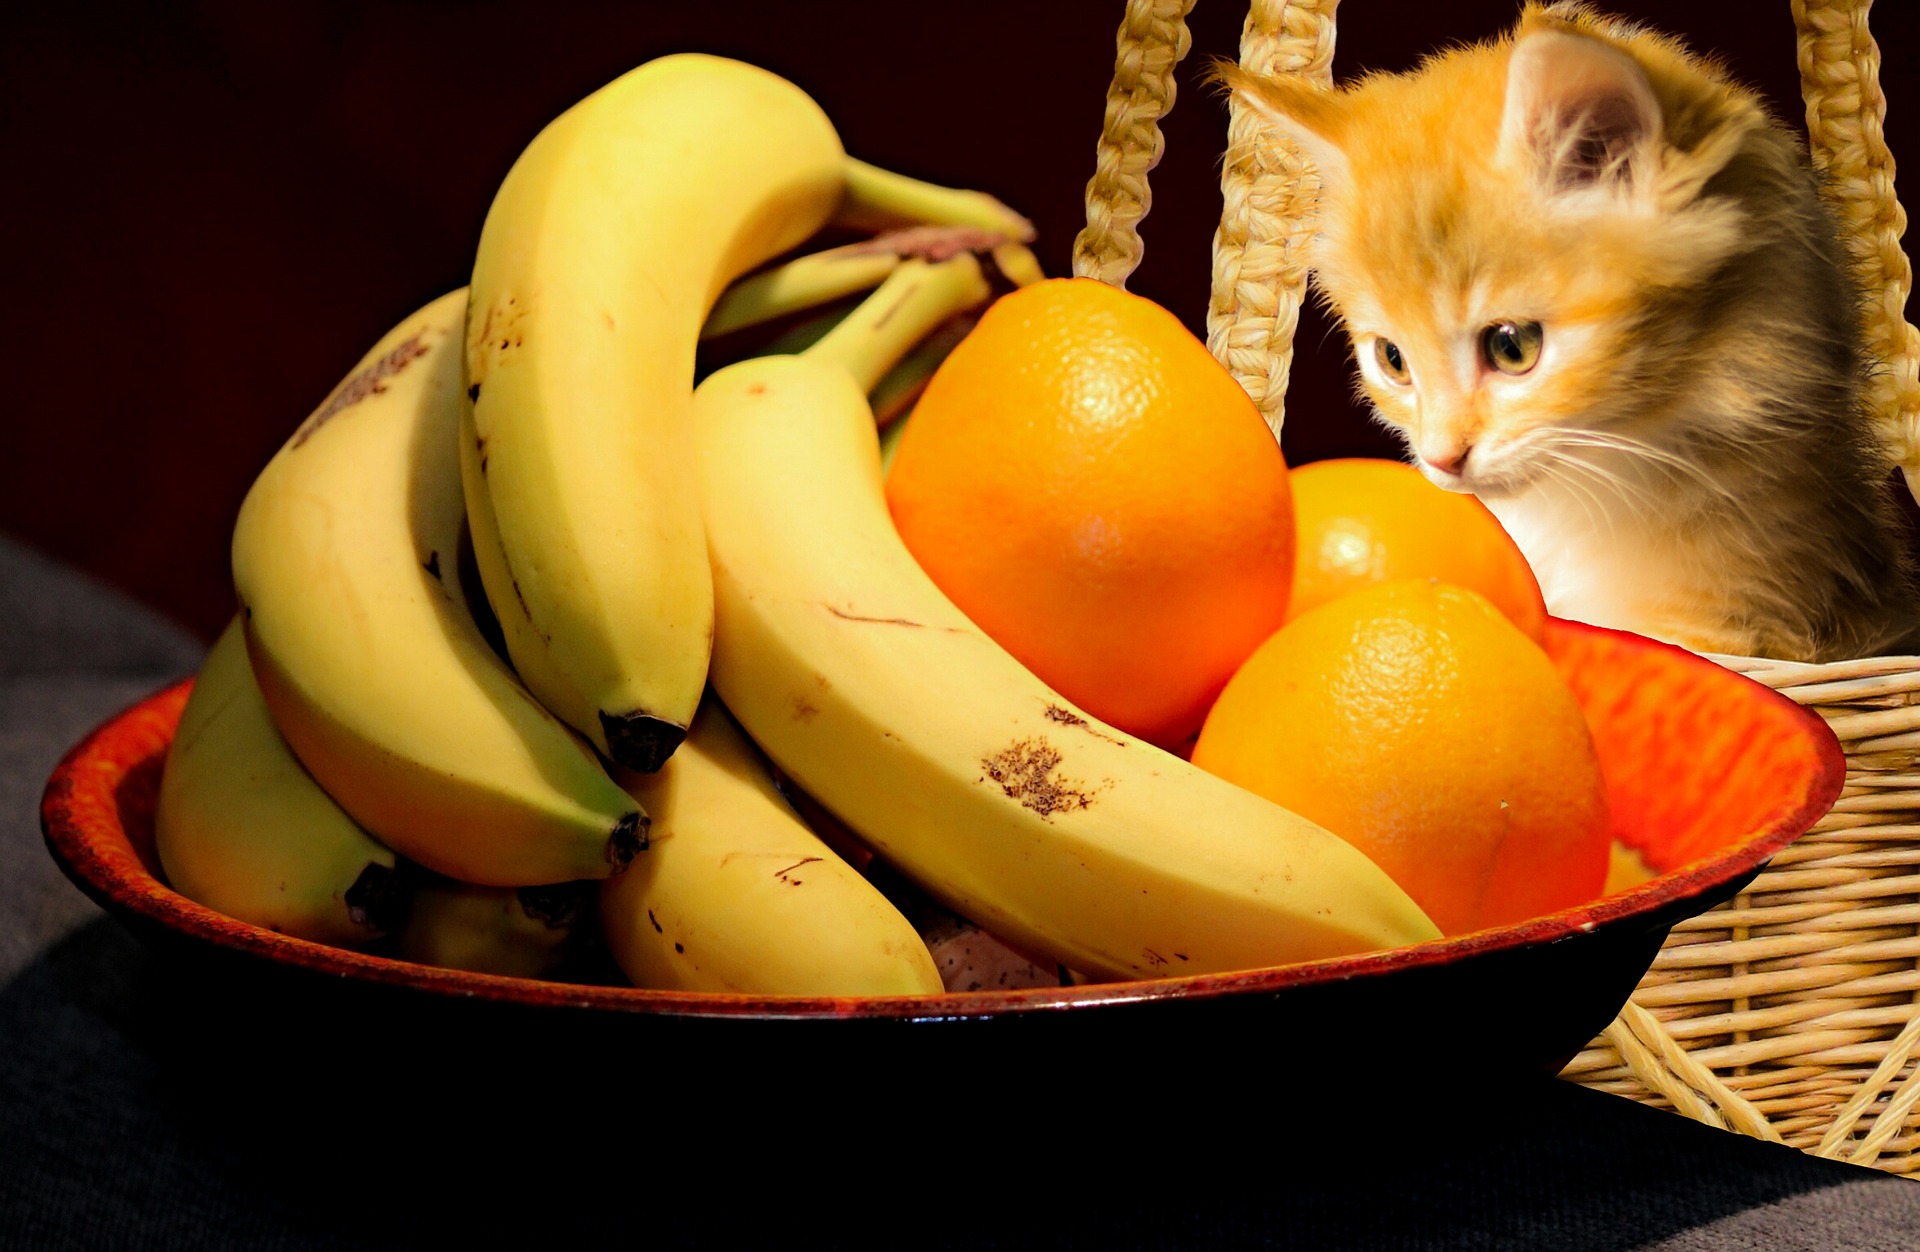 Can Cats Eat Bananas 4 Keys To Feeding The Fruit To Your Cat Safely Daily Paws